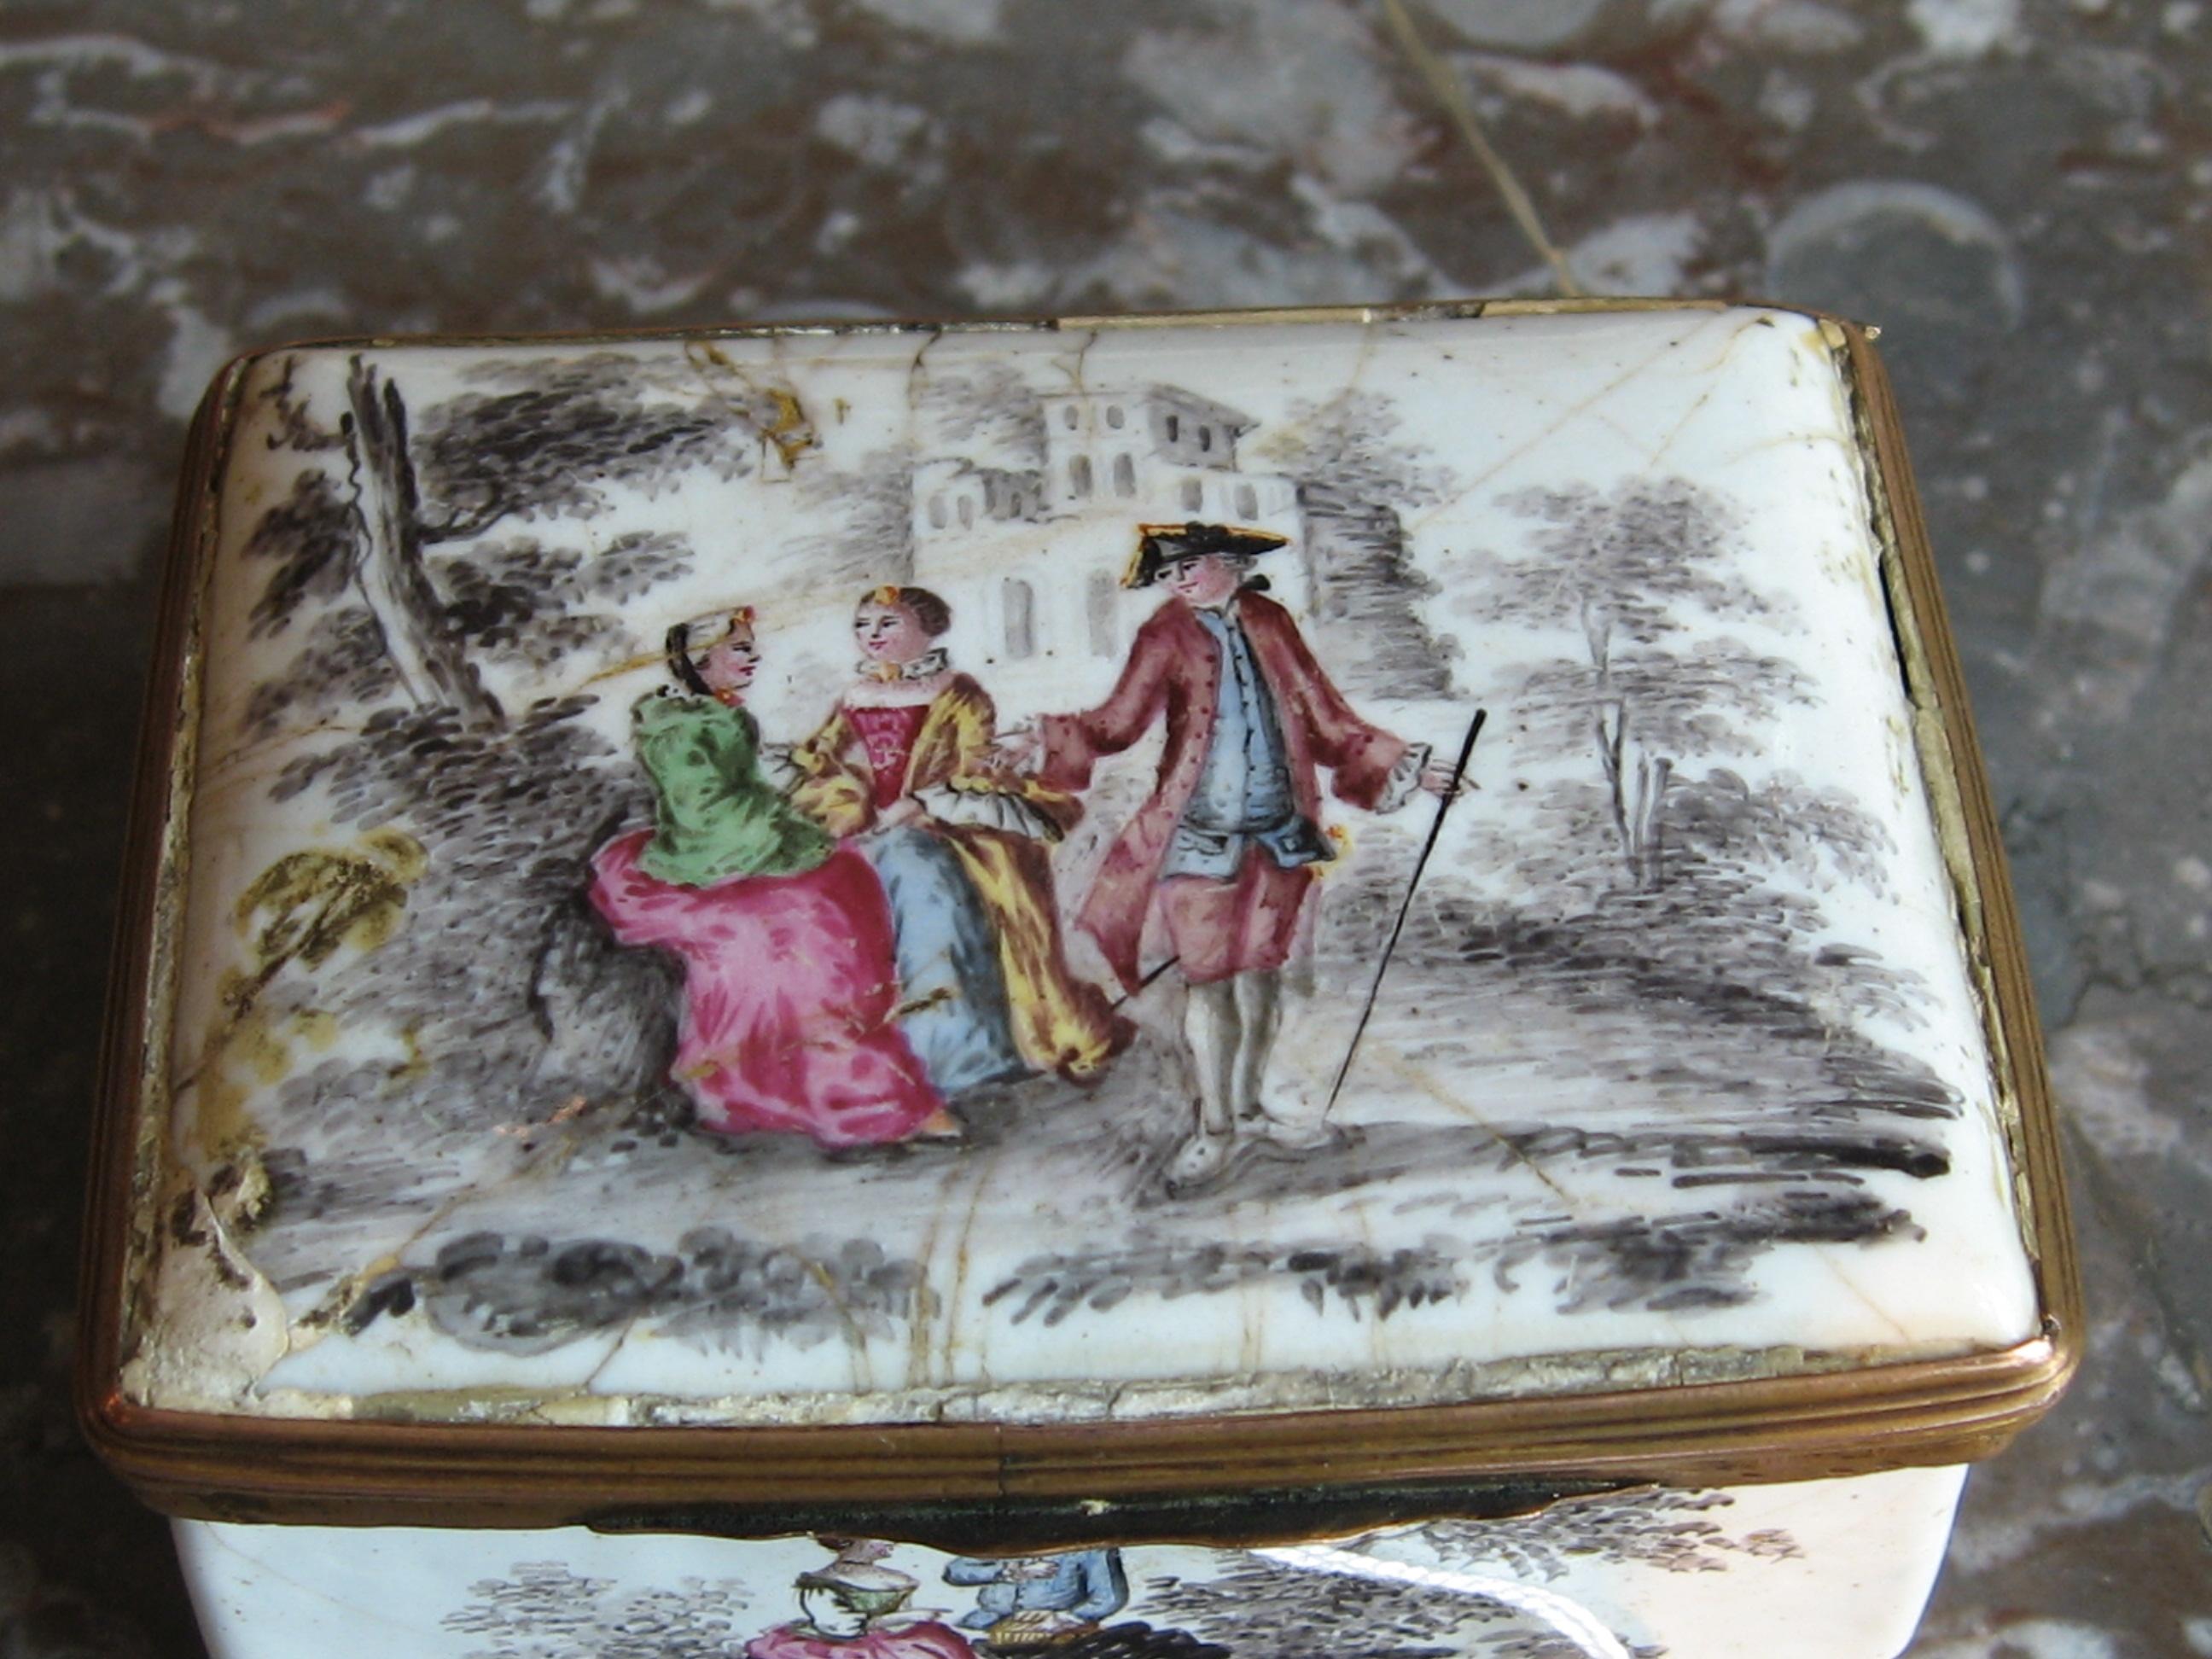 Erotic Snuff Tobacco Box with Highly Explicit Erotic Scenes Behind Secret Lid 2